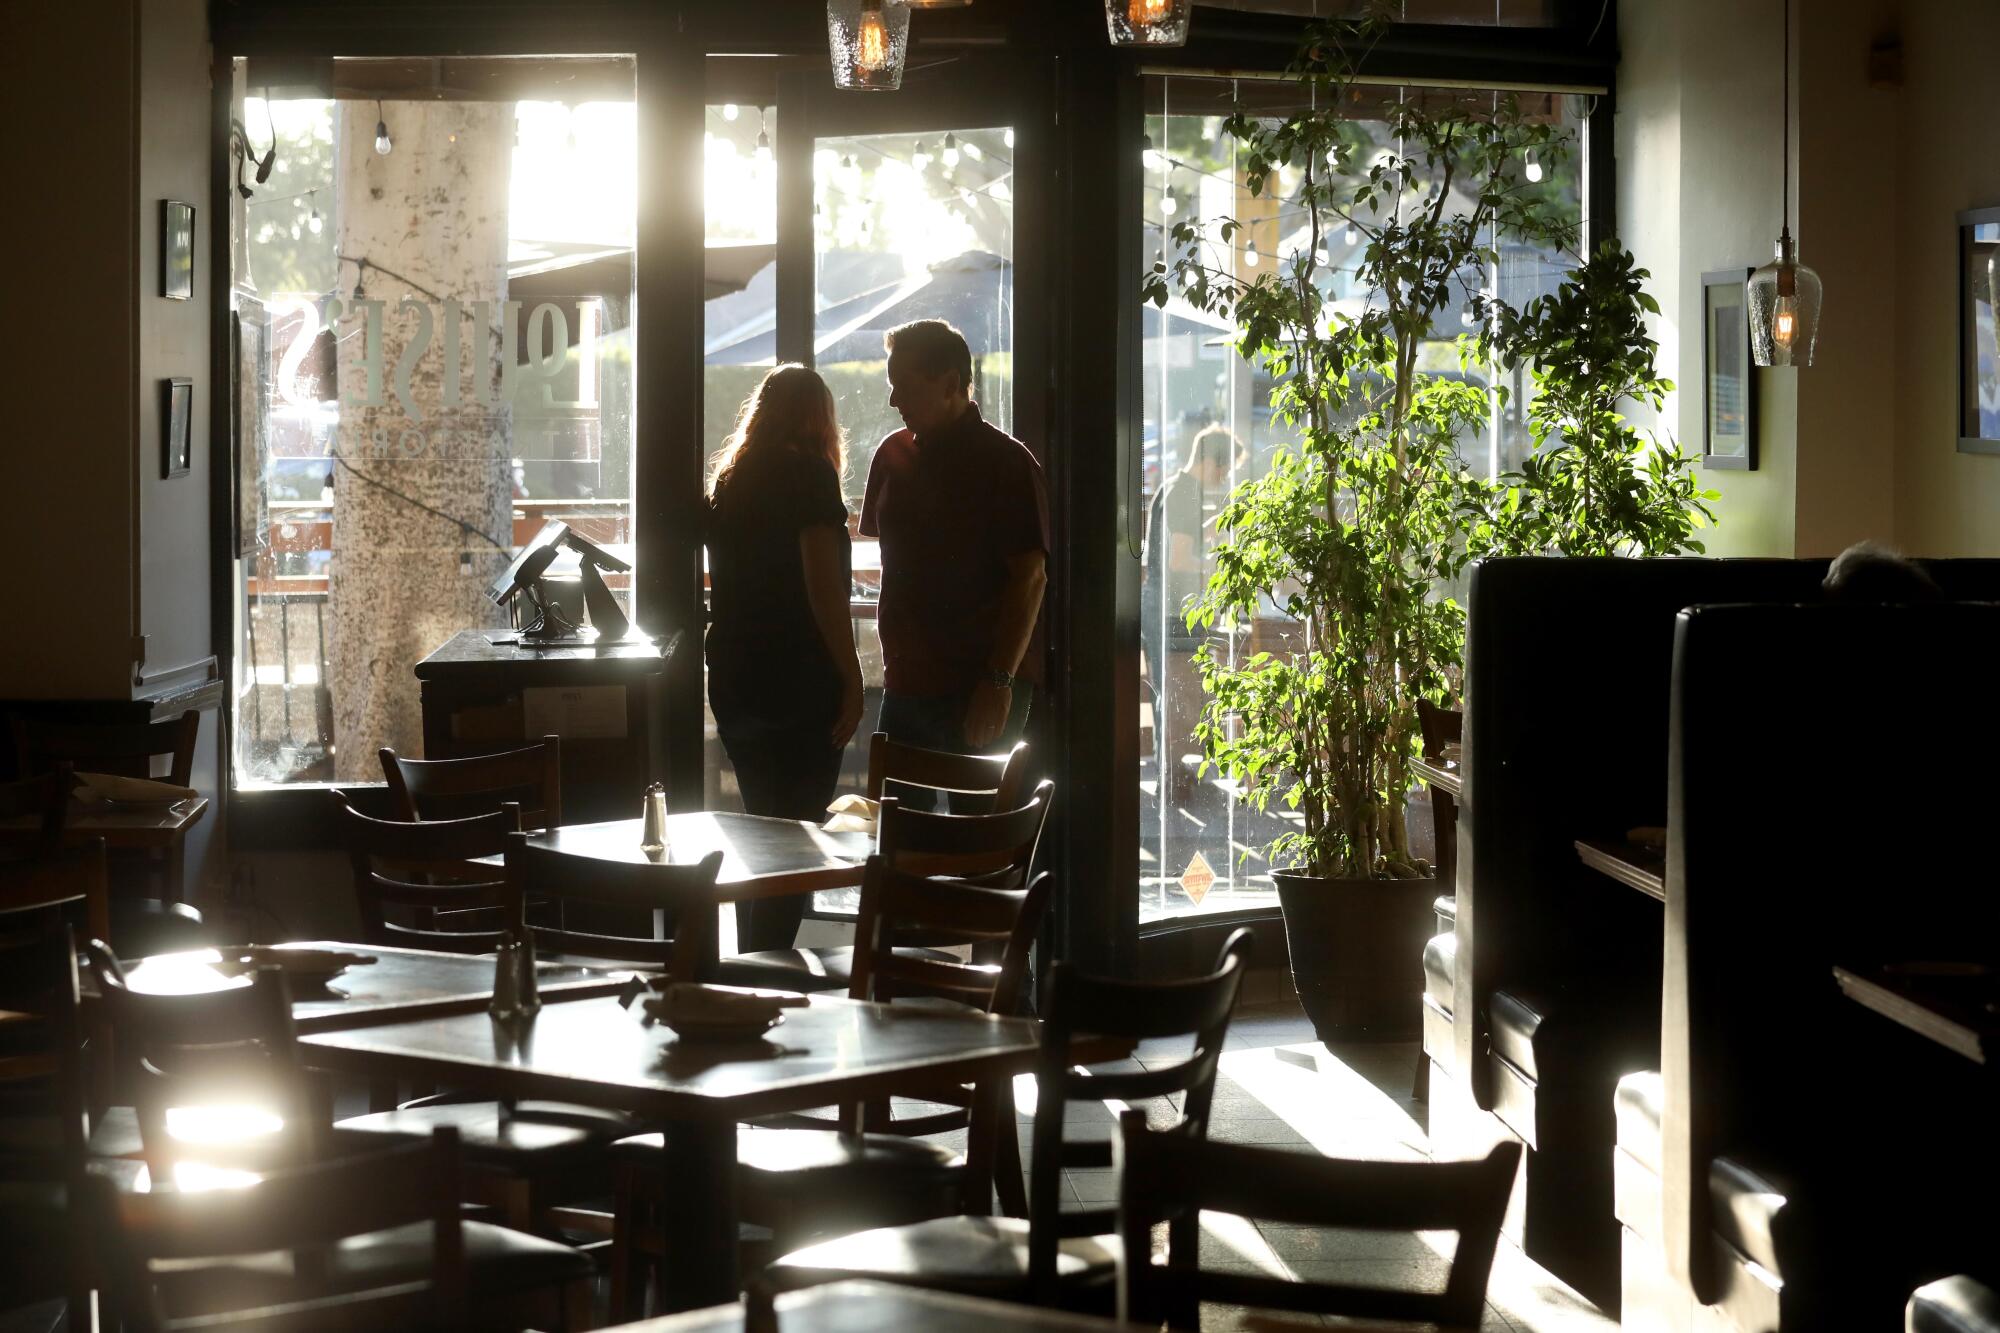 Rob and Karen Serritella, co-owners of Louise's Trattoria, wait for customers at the front door of the restaurant.